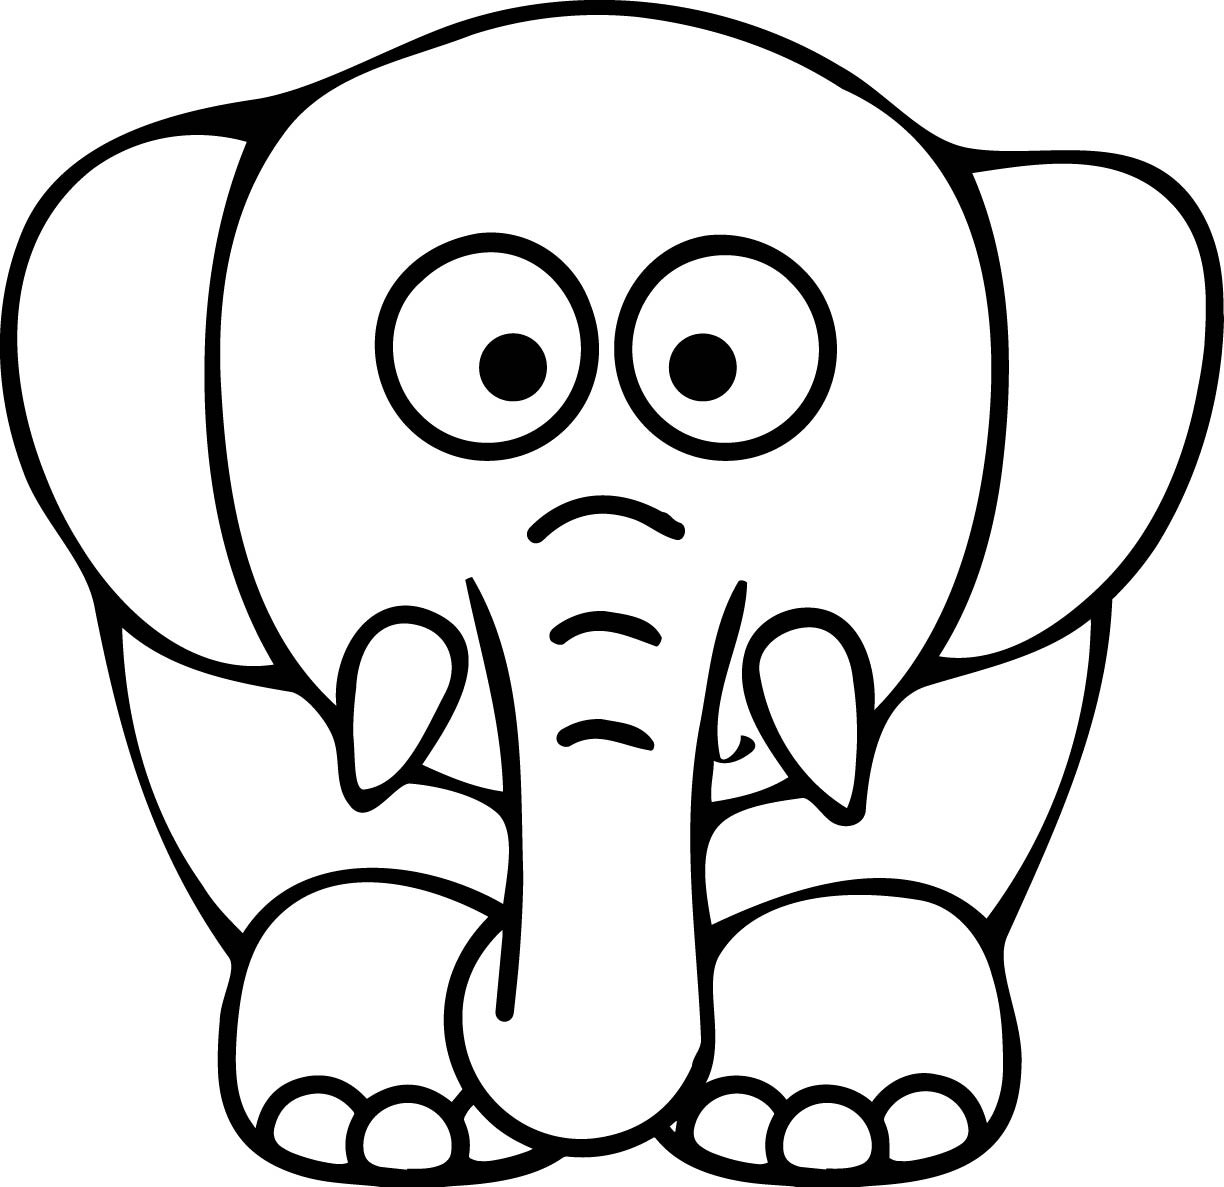 Baby Elephant Coloring Pages
 Baby Elephant Cartoon Drawing at GetDrawings